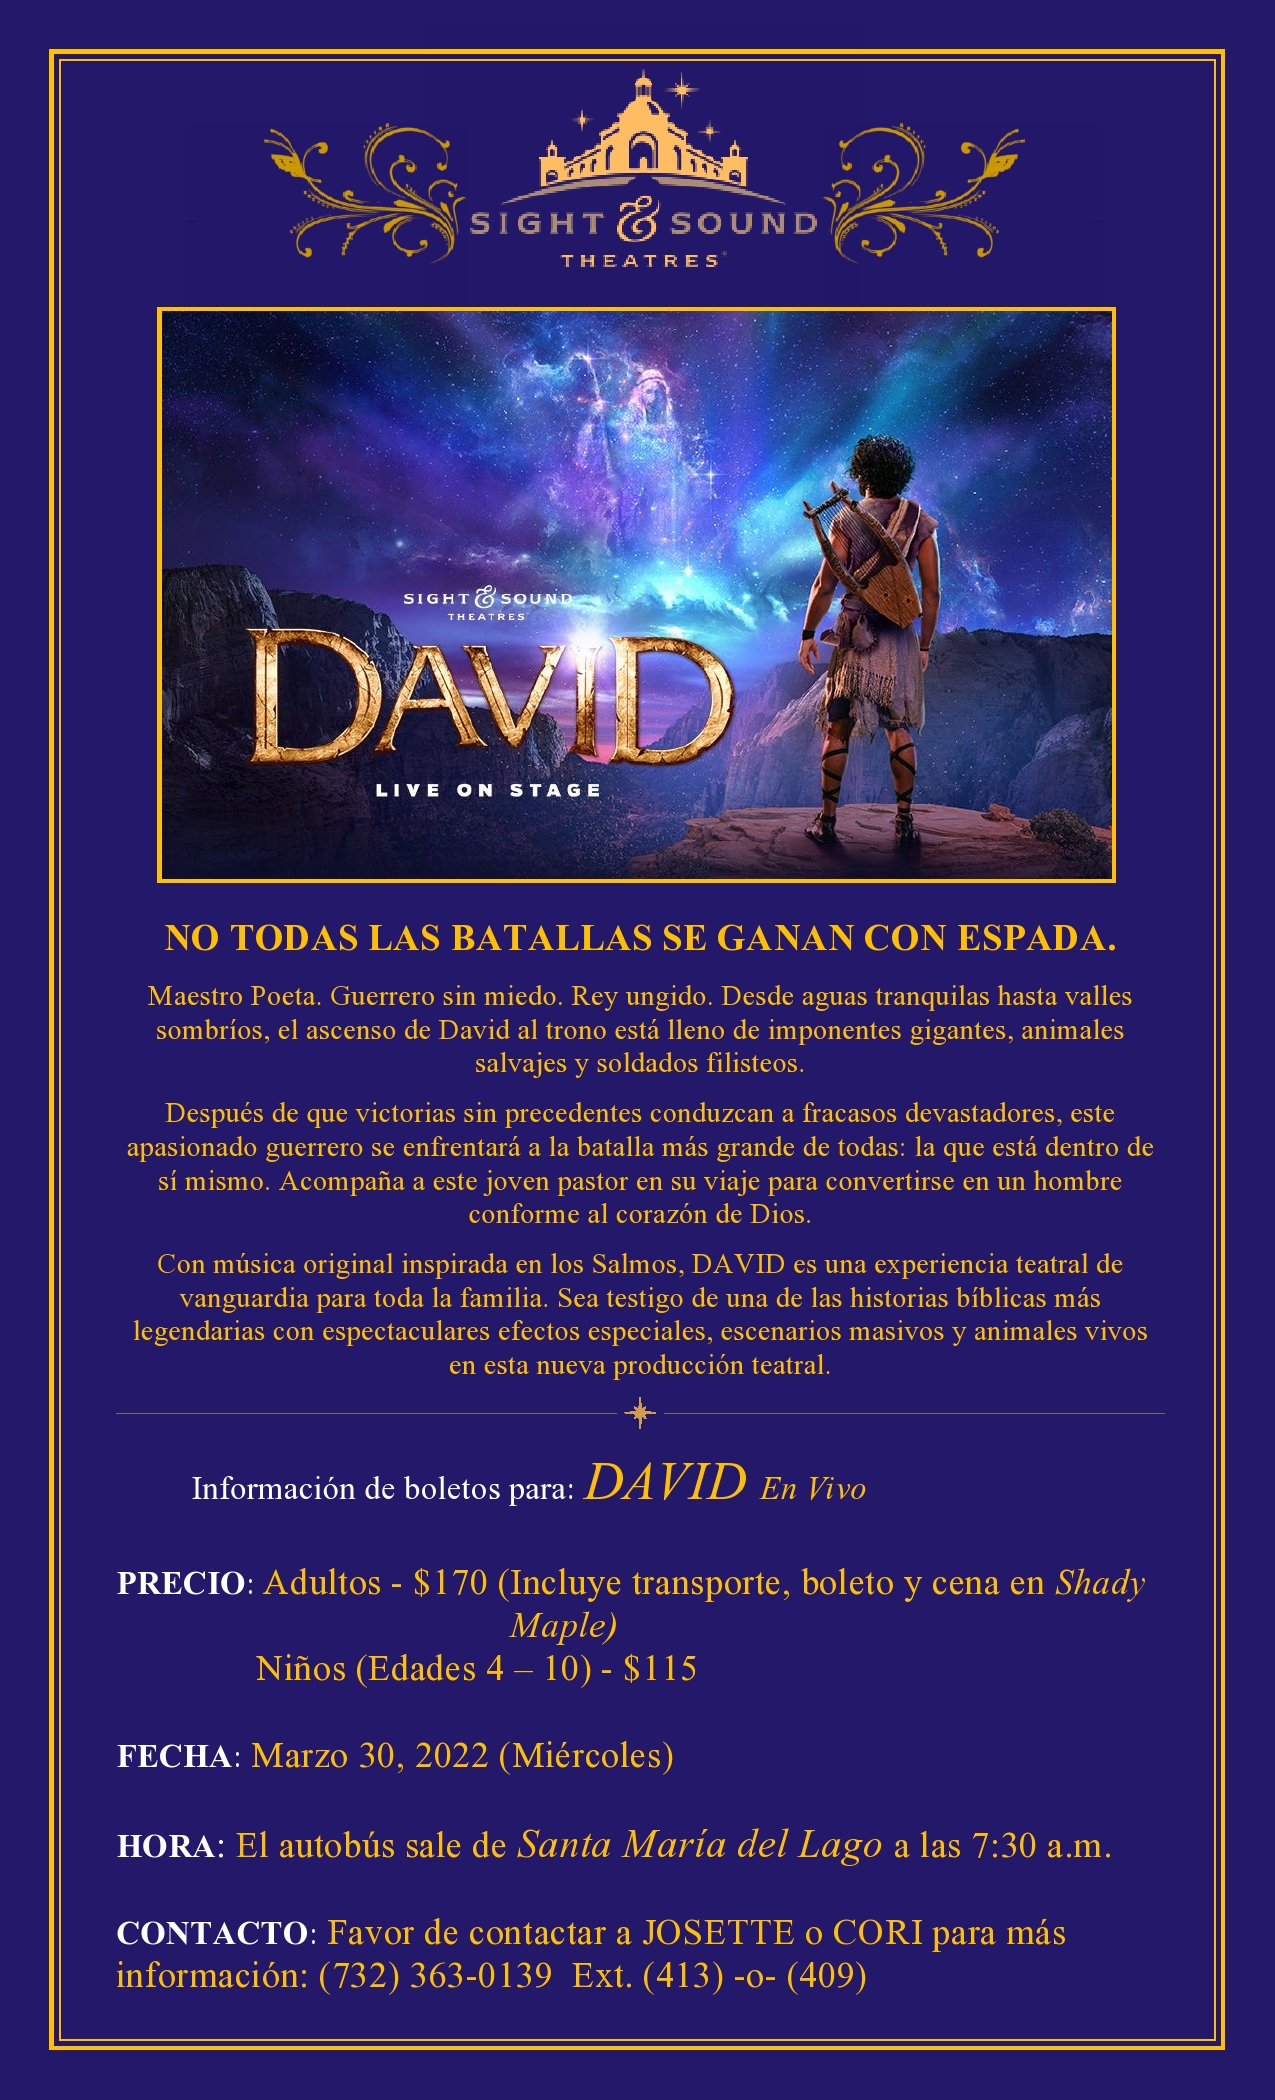 DAVID ss theater flyer SPAN with contact